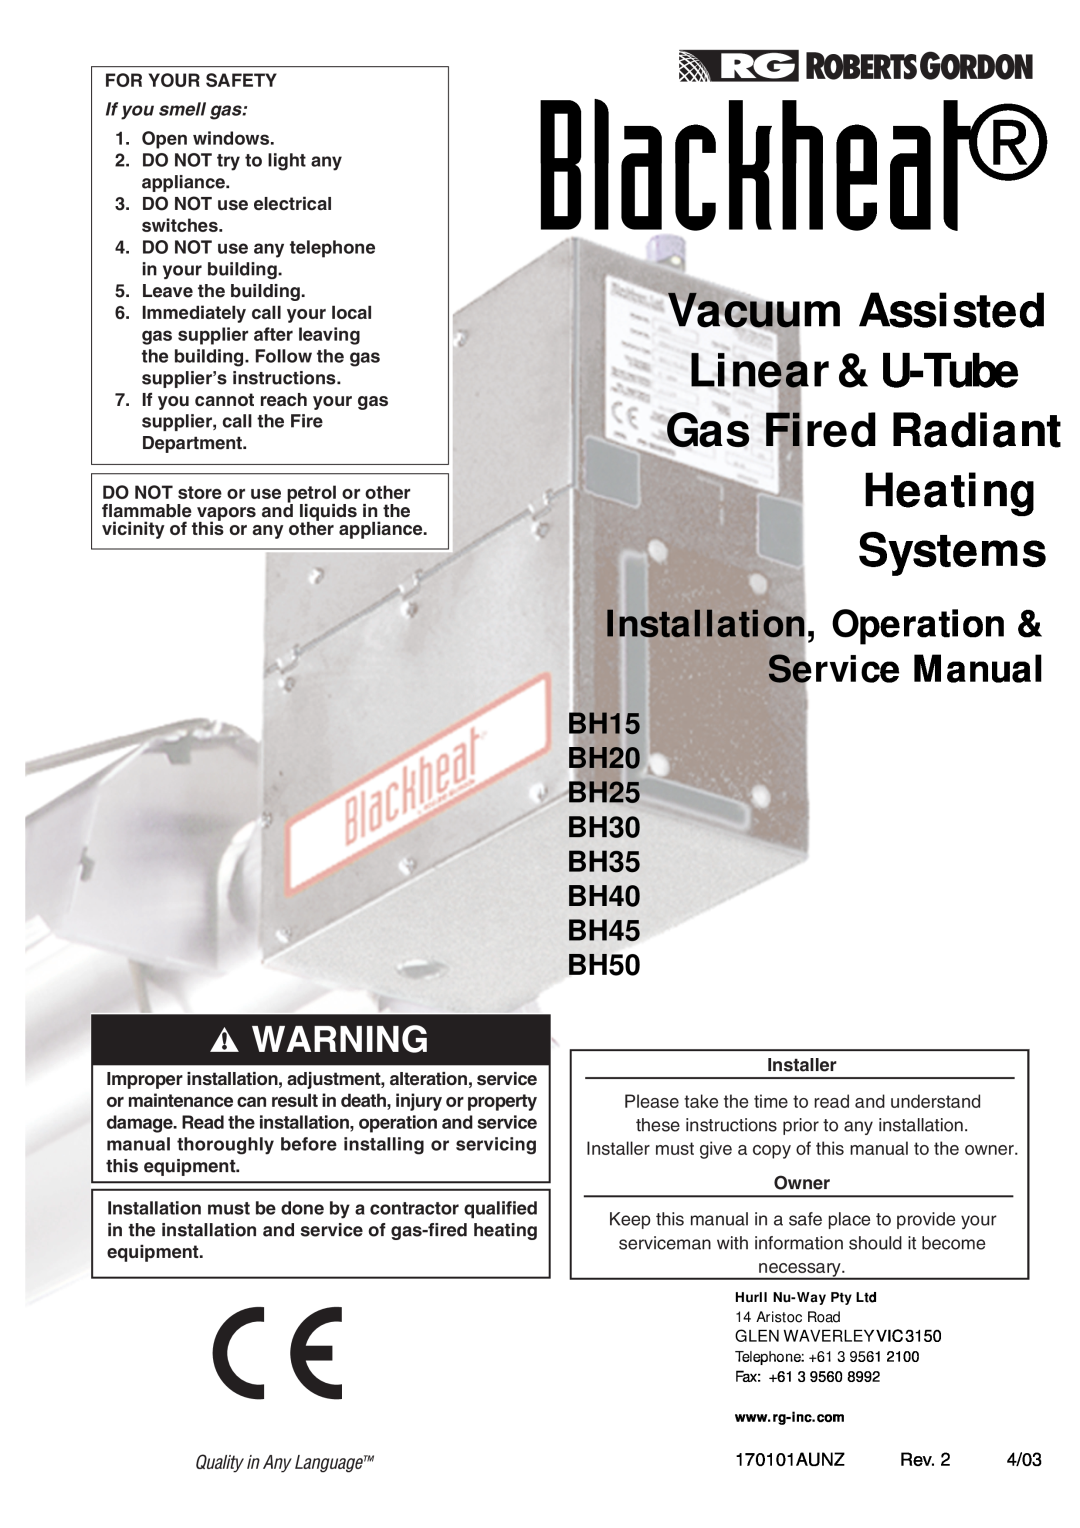 Roberts Gorden BH15 service manual Blackheat, Gas Fired Radiant Heating, Systems, Linear & U-Tube, Vacuum Assisted 